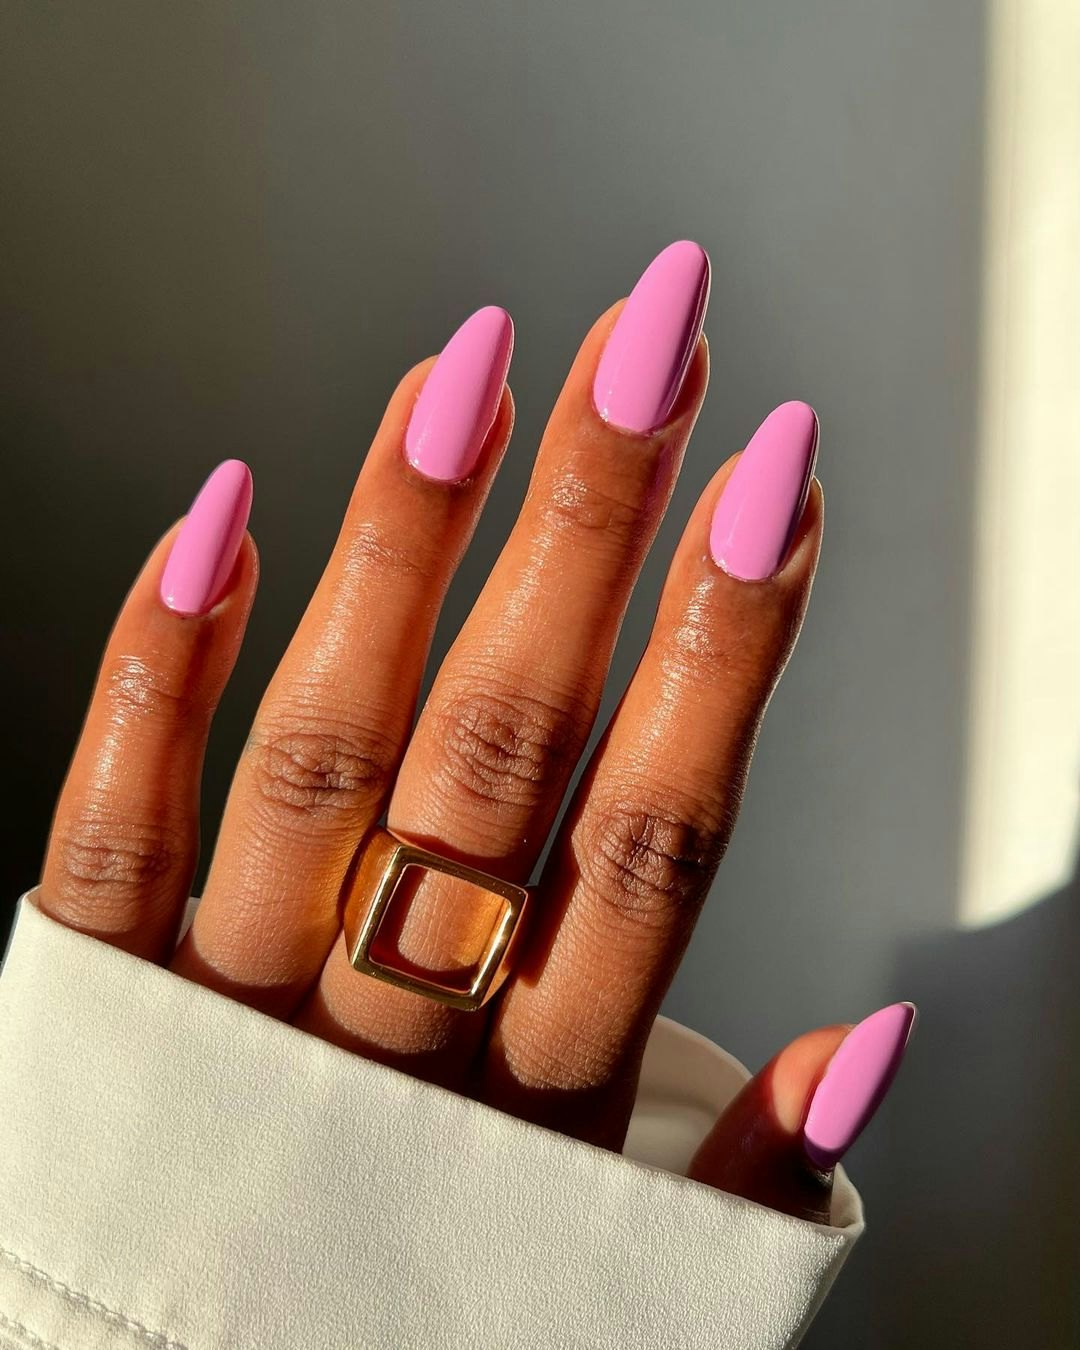 2023 Nail Colors By Month: Get Popular Colors for Every Month | PERFECT